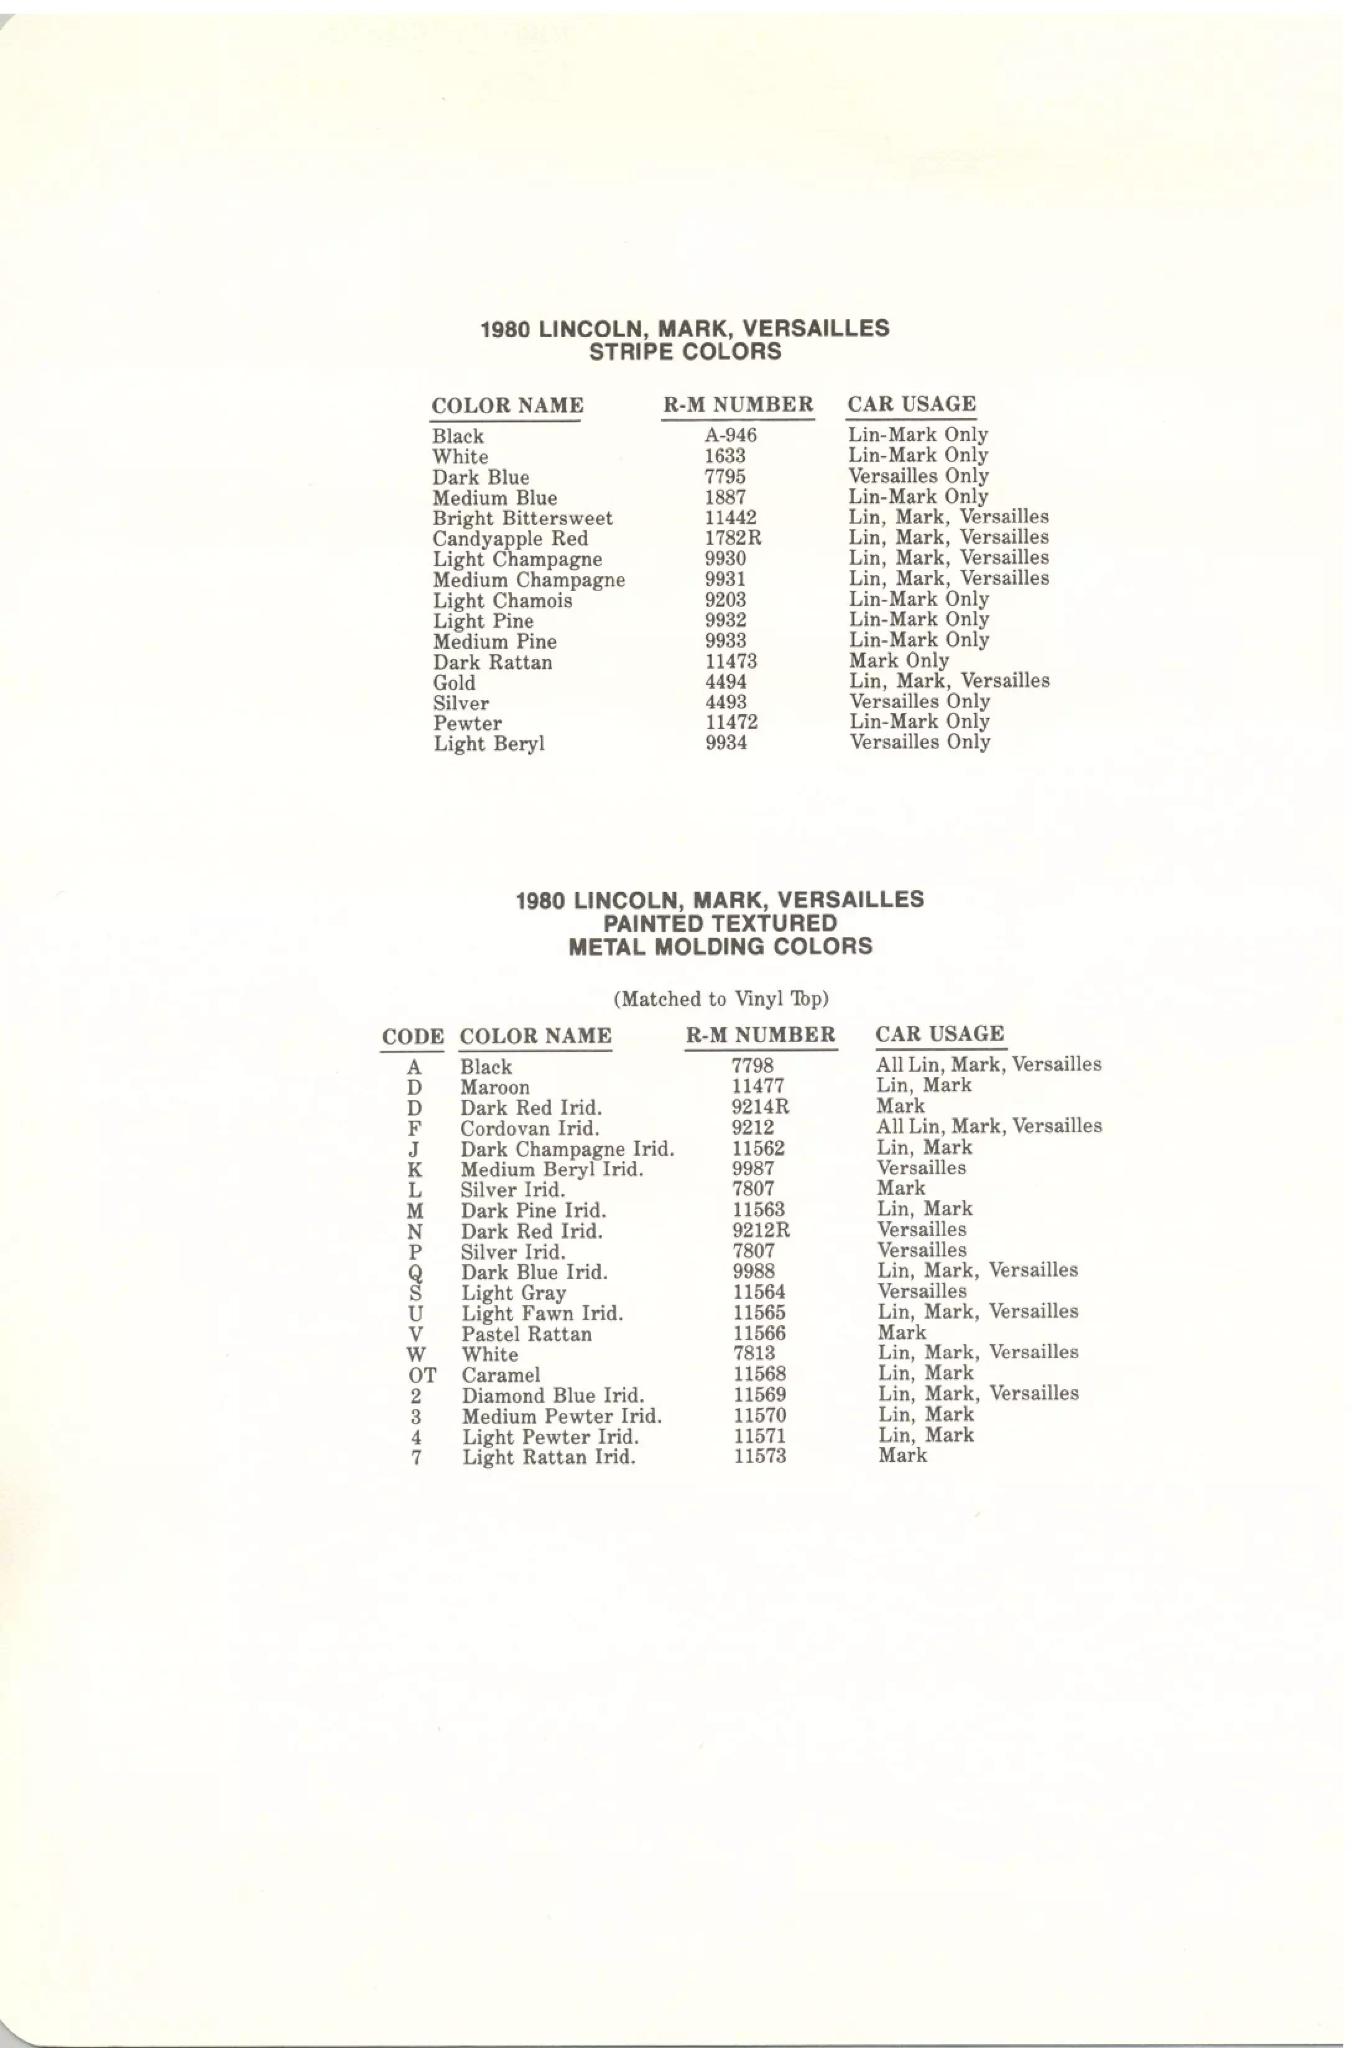 List Containing all the colors used on Lincoln  vehicles in 1980